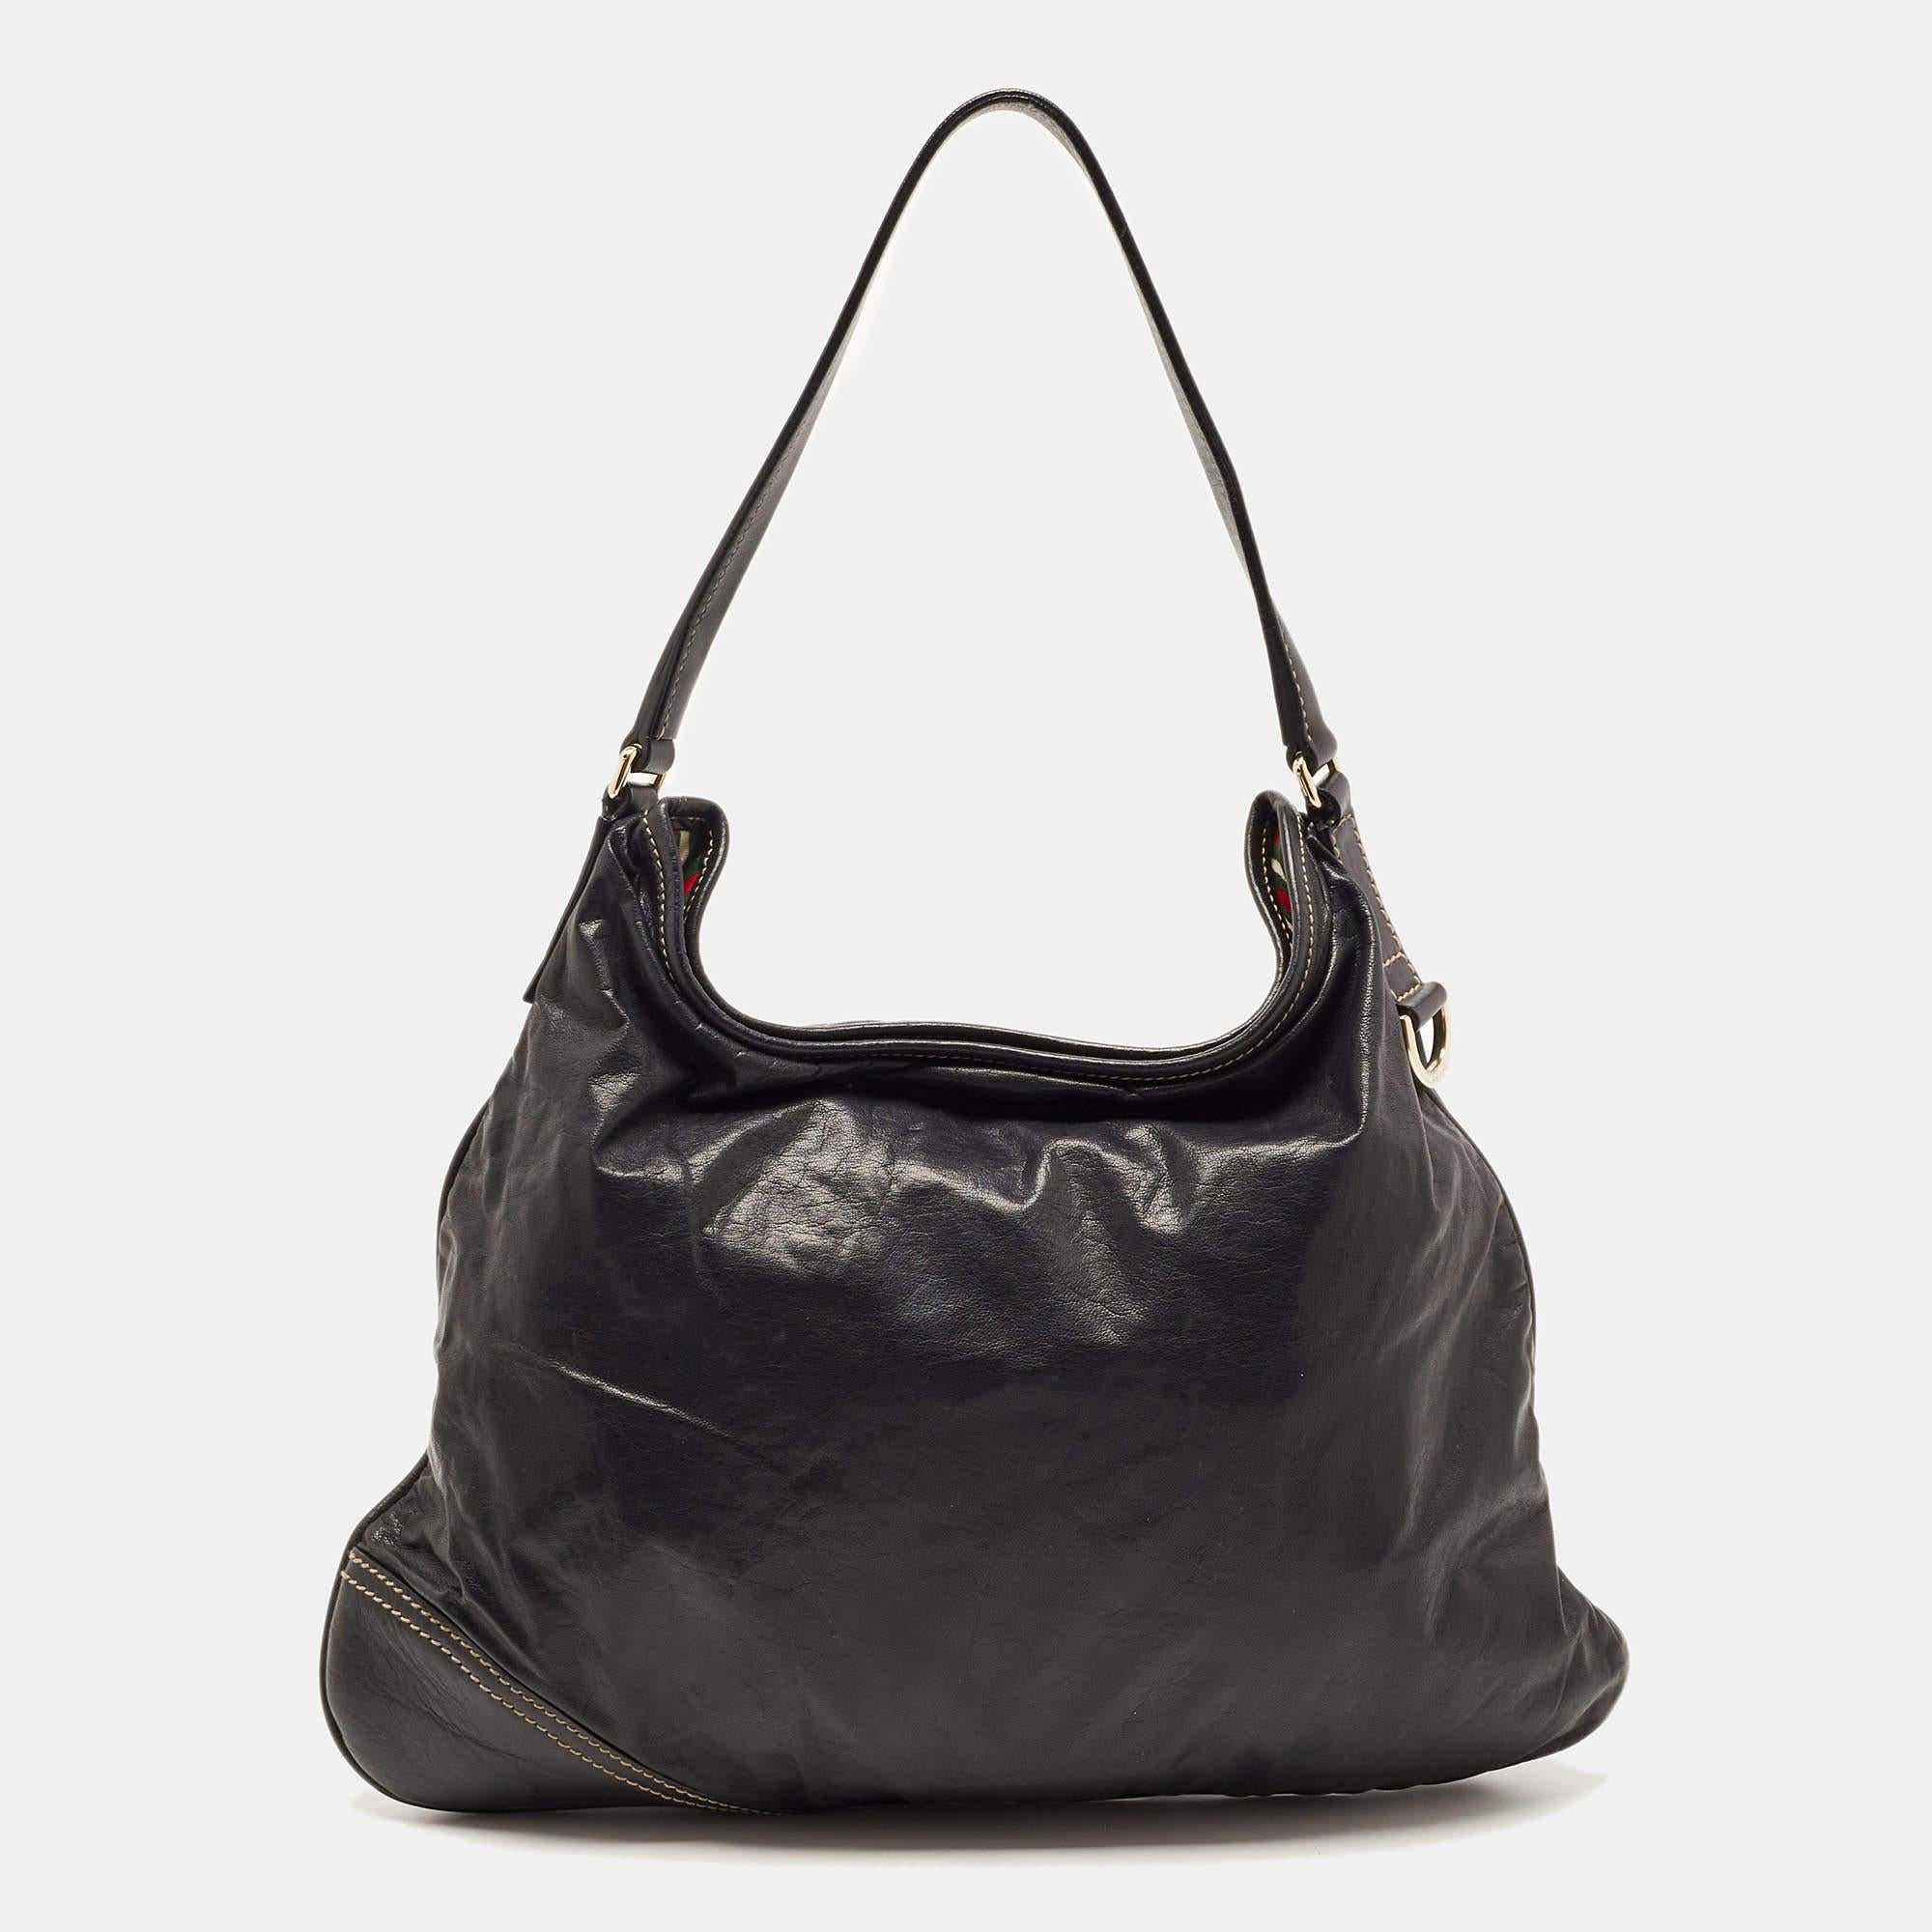 This hobo from Gucci has been designed to be a worthy style companion! Crafted from leather, the bag features a spacious interior to carry your essentials in.

Includes: Info Booklet, Invoice